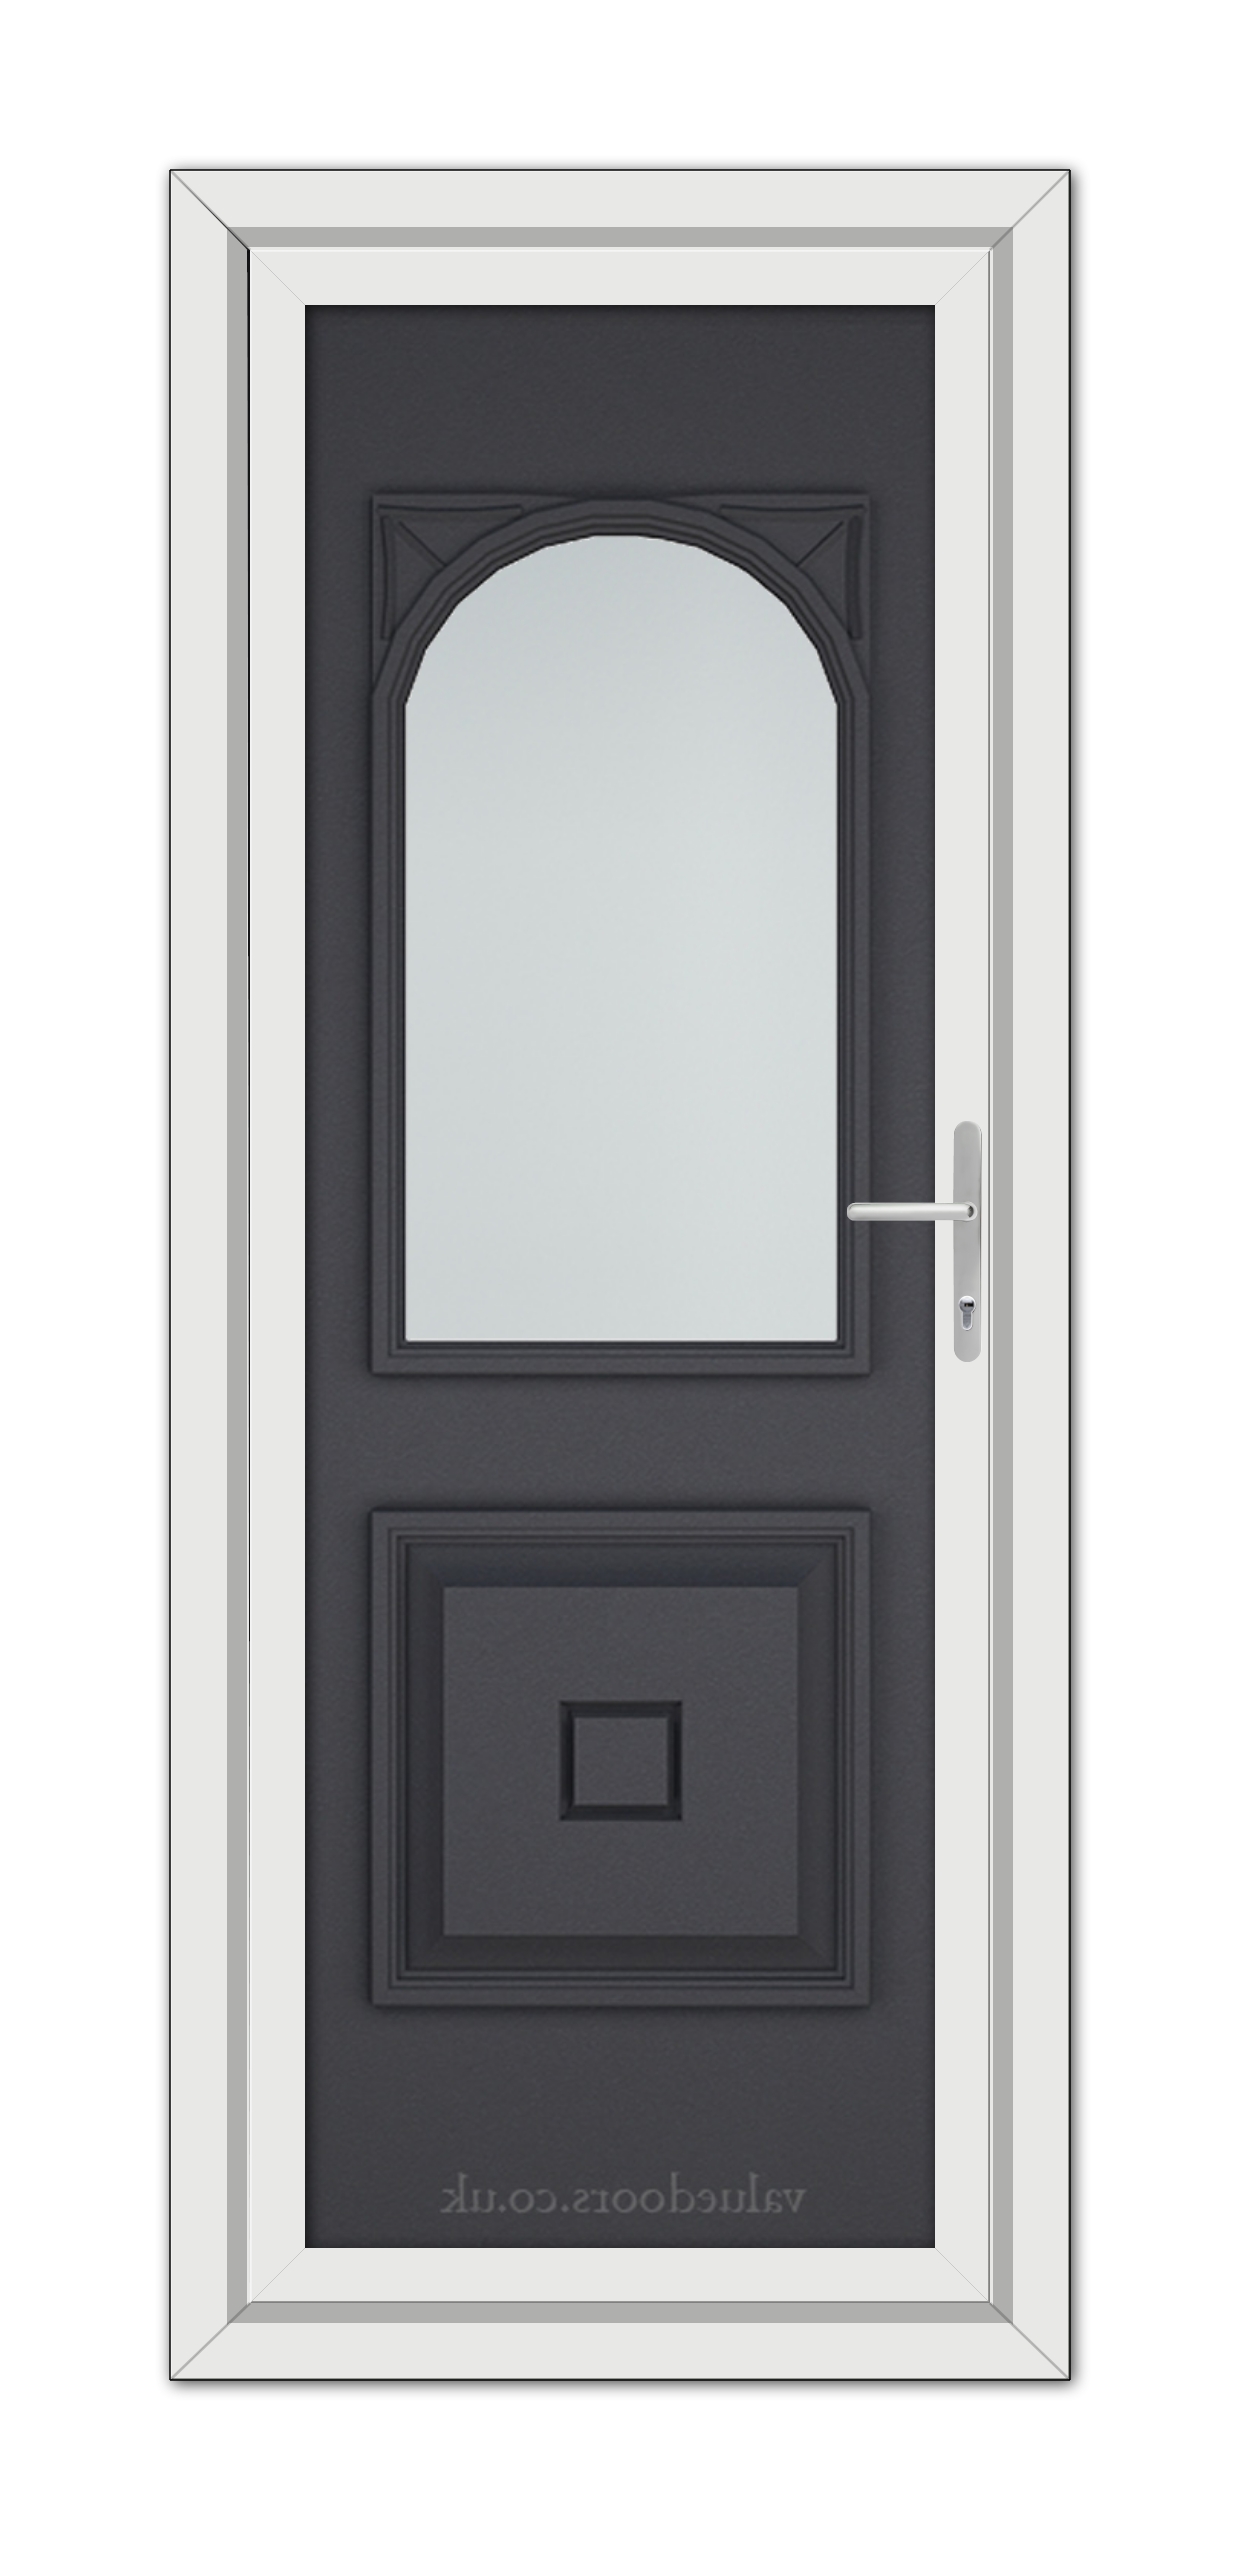 A modern Grey Grained Reims uPVC door with a vertical oval glass window at the top, set in a white frame, featuring a metallic handle on the right.